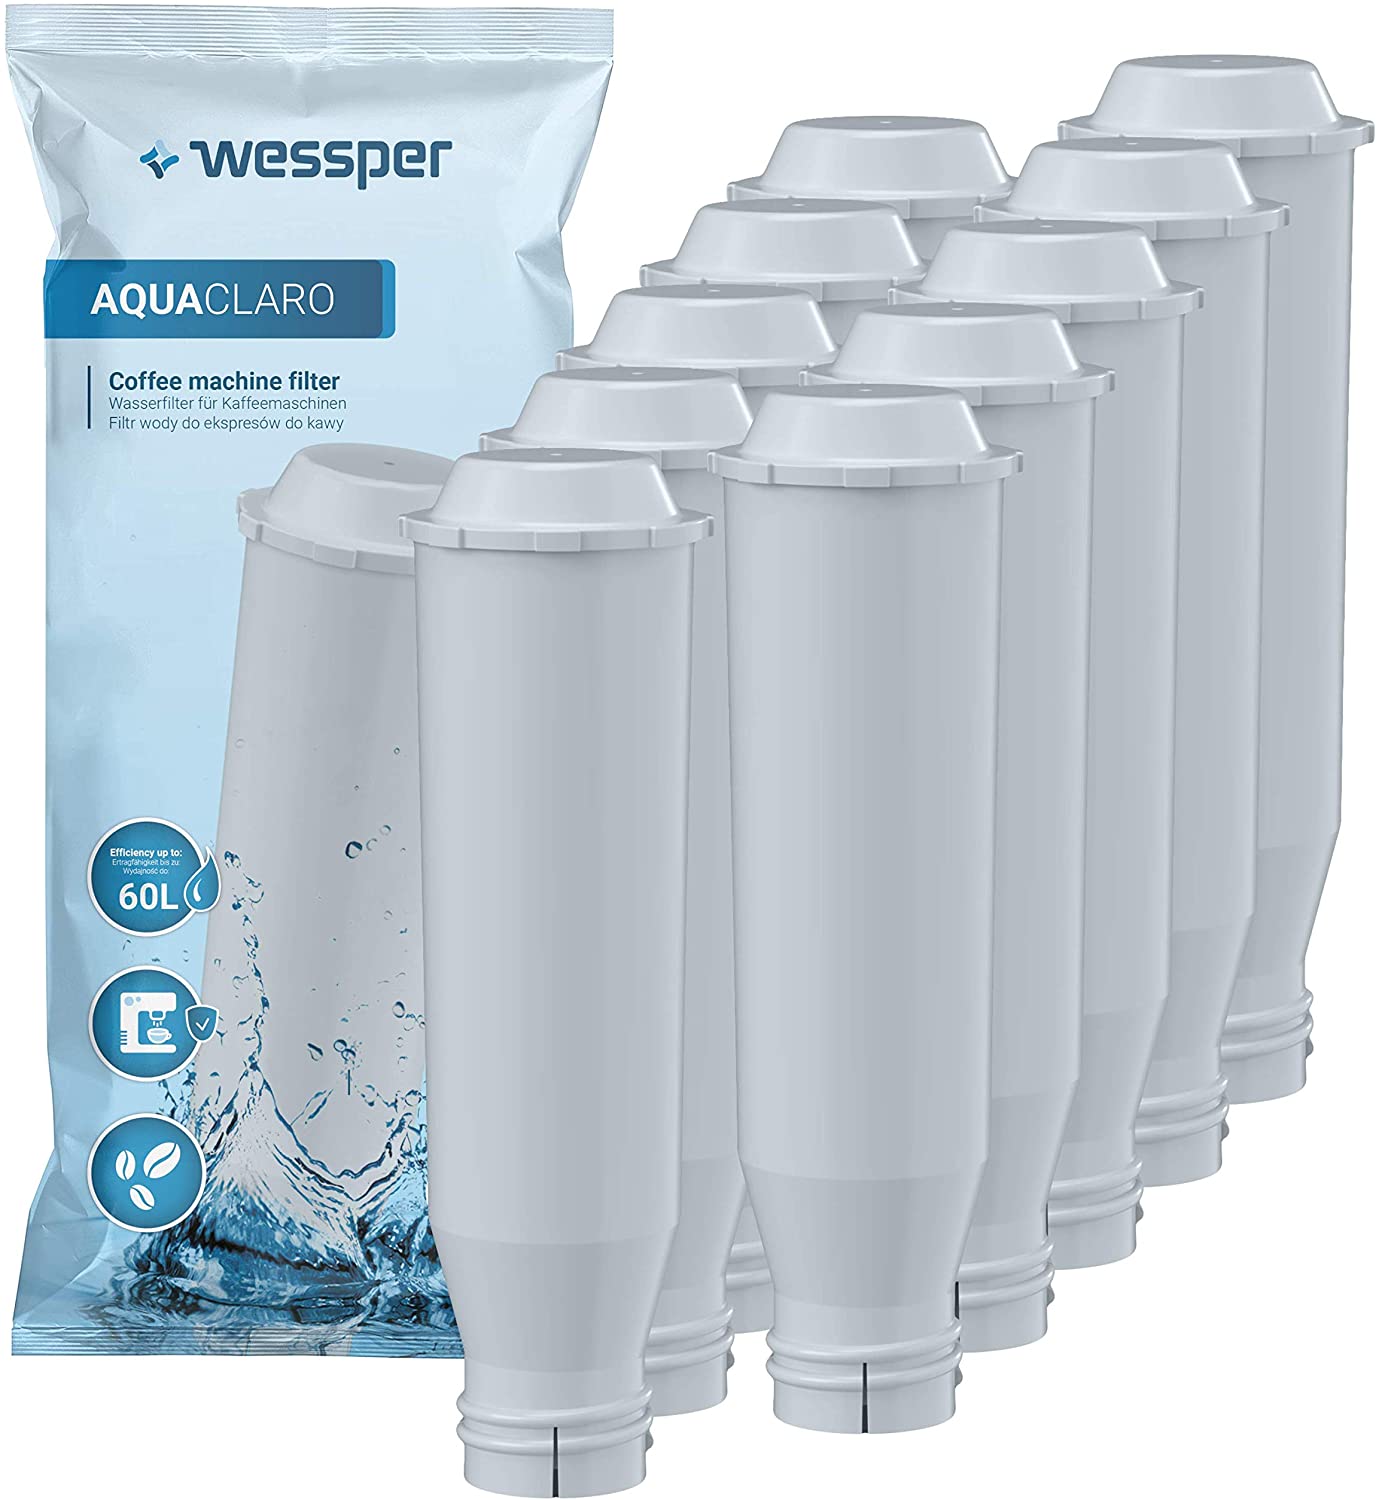 Wessper Water Filter Compatible with Krups Claris F088 F 088, Fits Many Models from Krups, Siemens, Bosch, AEG, Tefal, Neff, Gaggenau (Pack of 10)